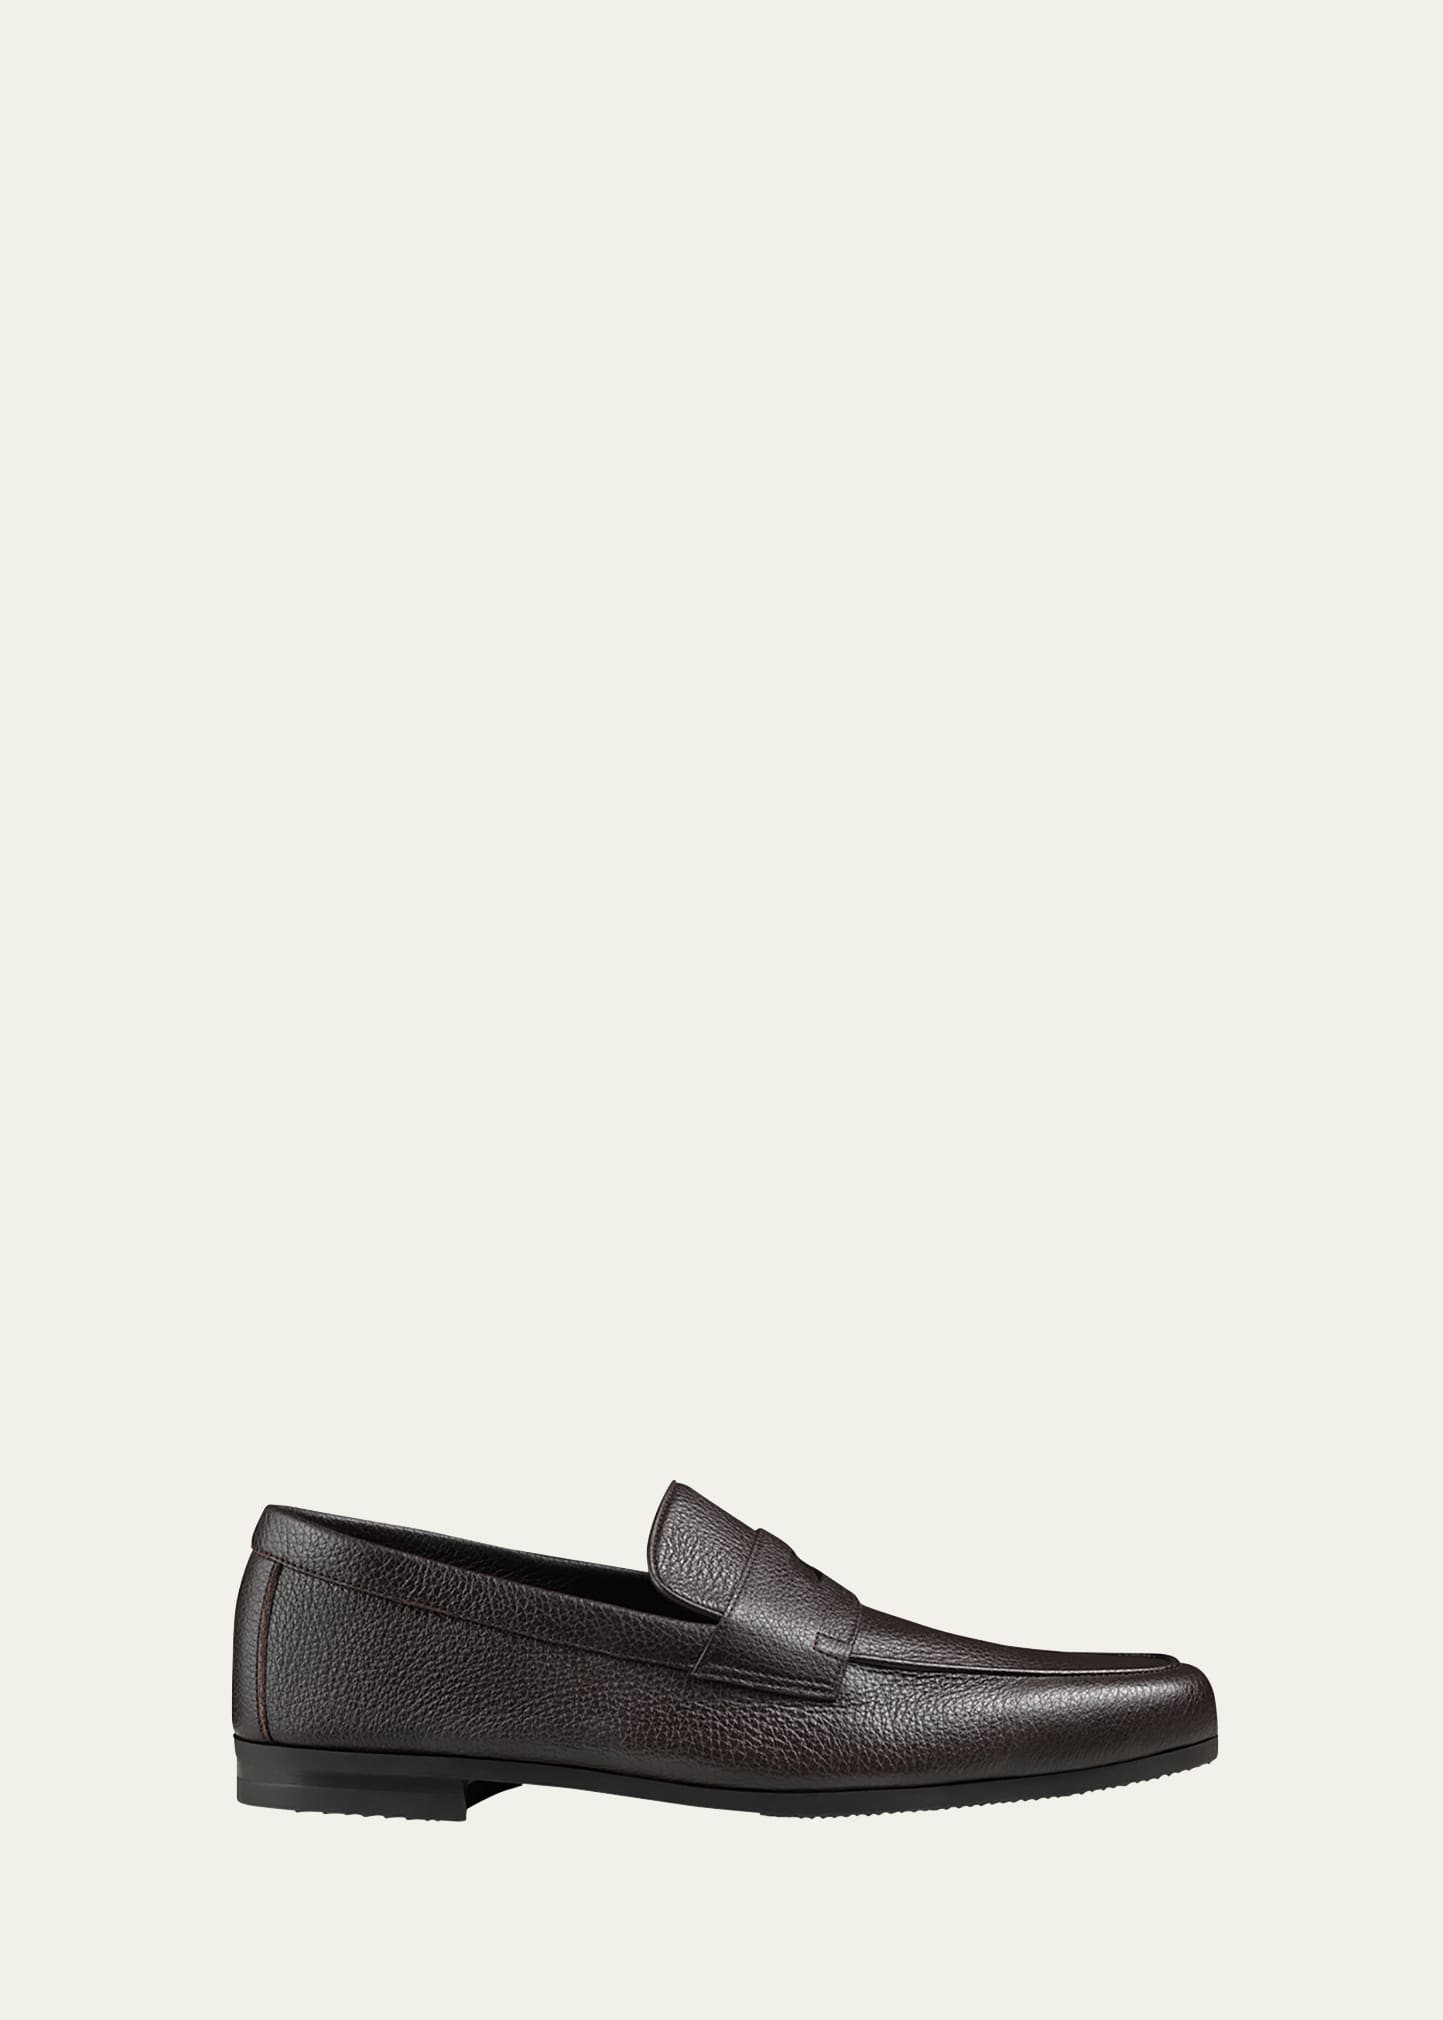 Men's Thorne Soft Textured Leather Penny Loafers